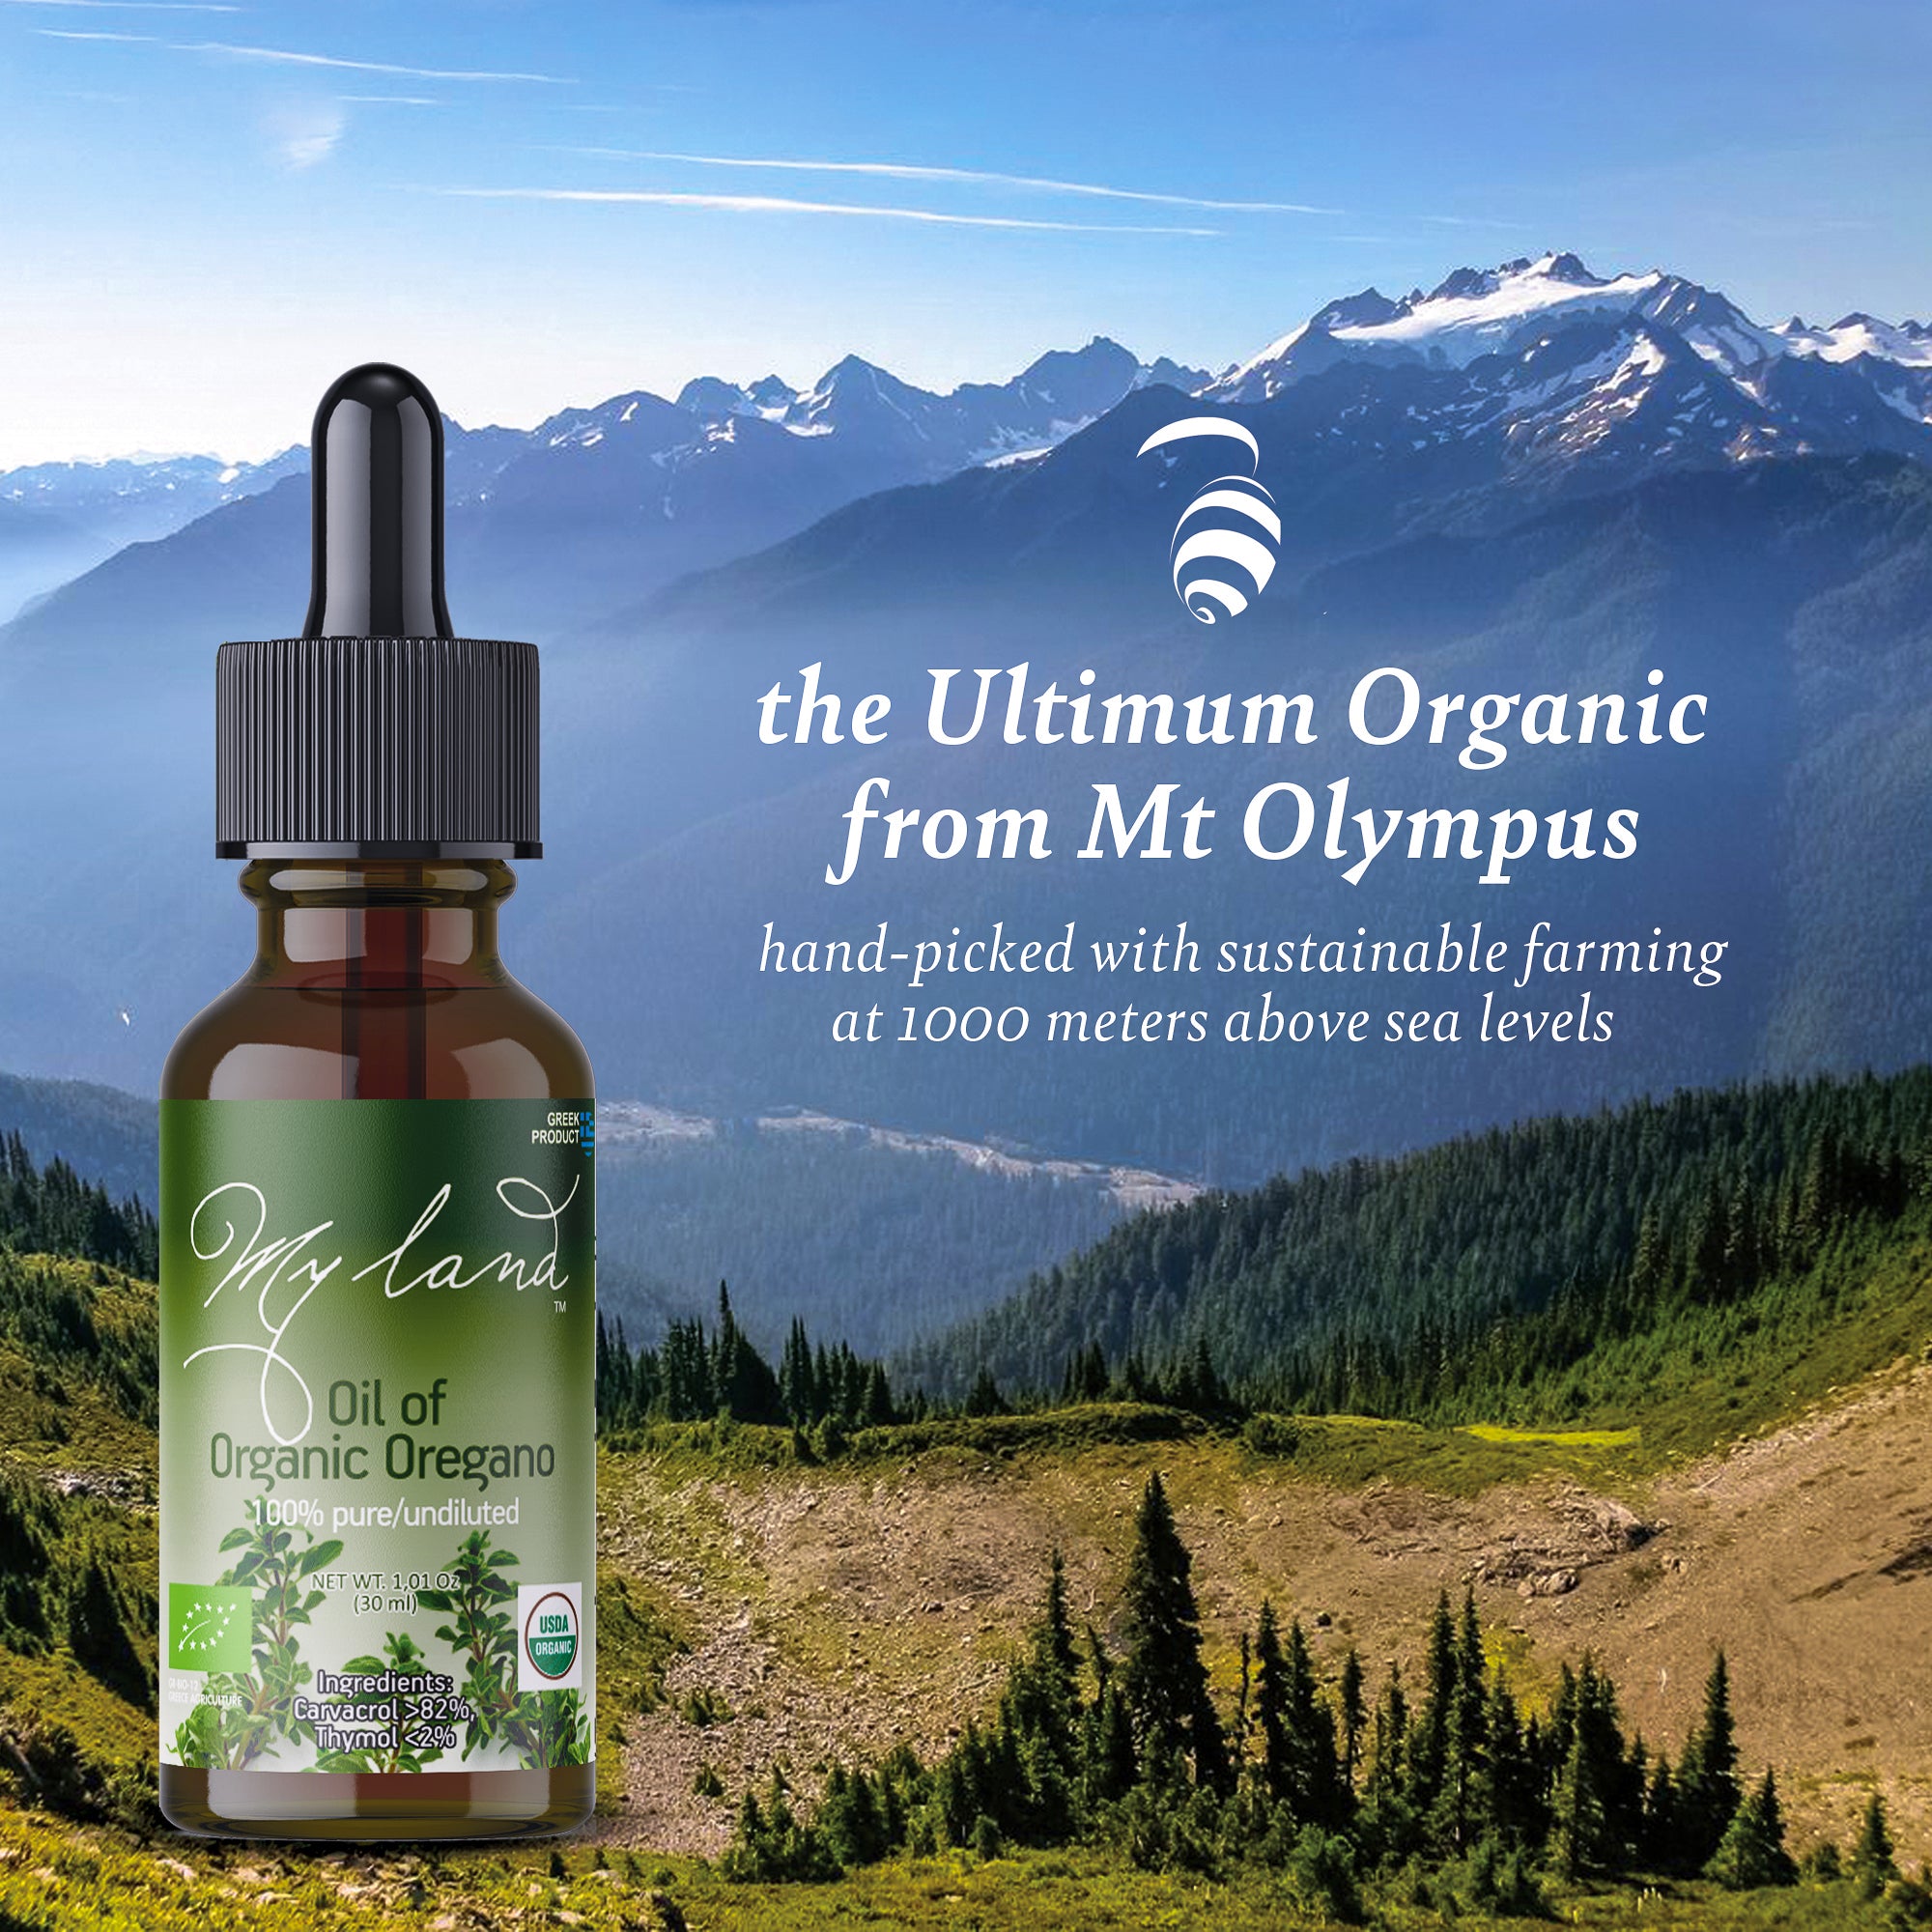 My Land organic oil of oregano from Mt Olympus pure undiluted